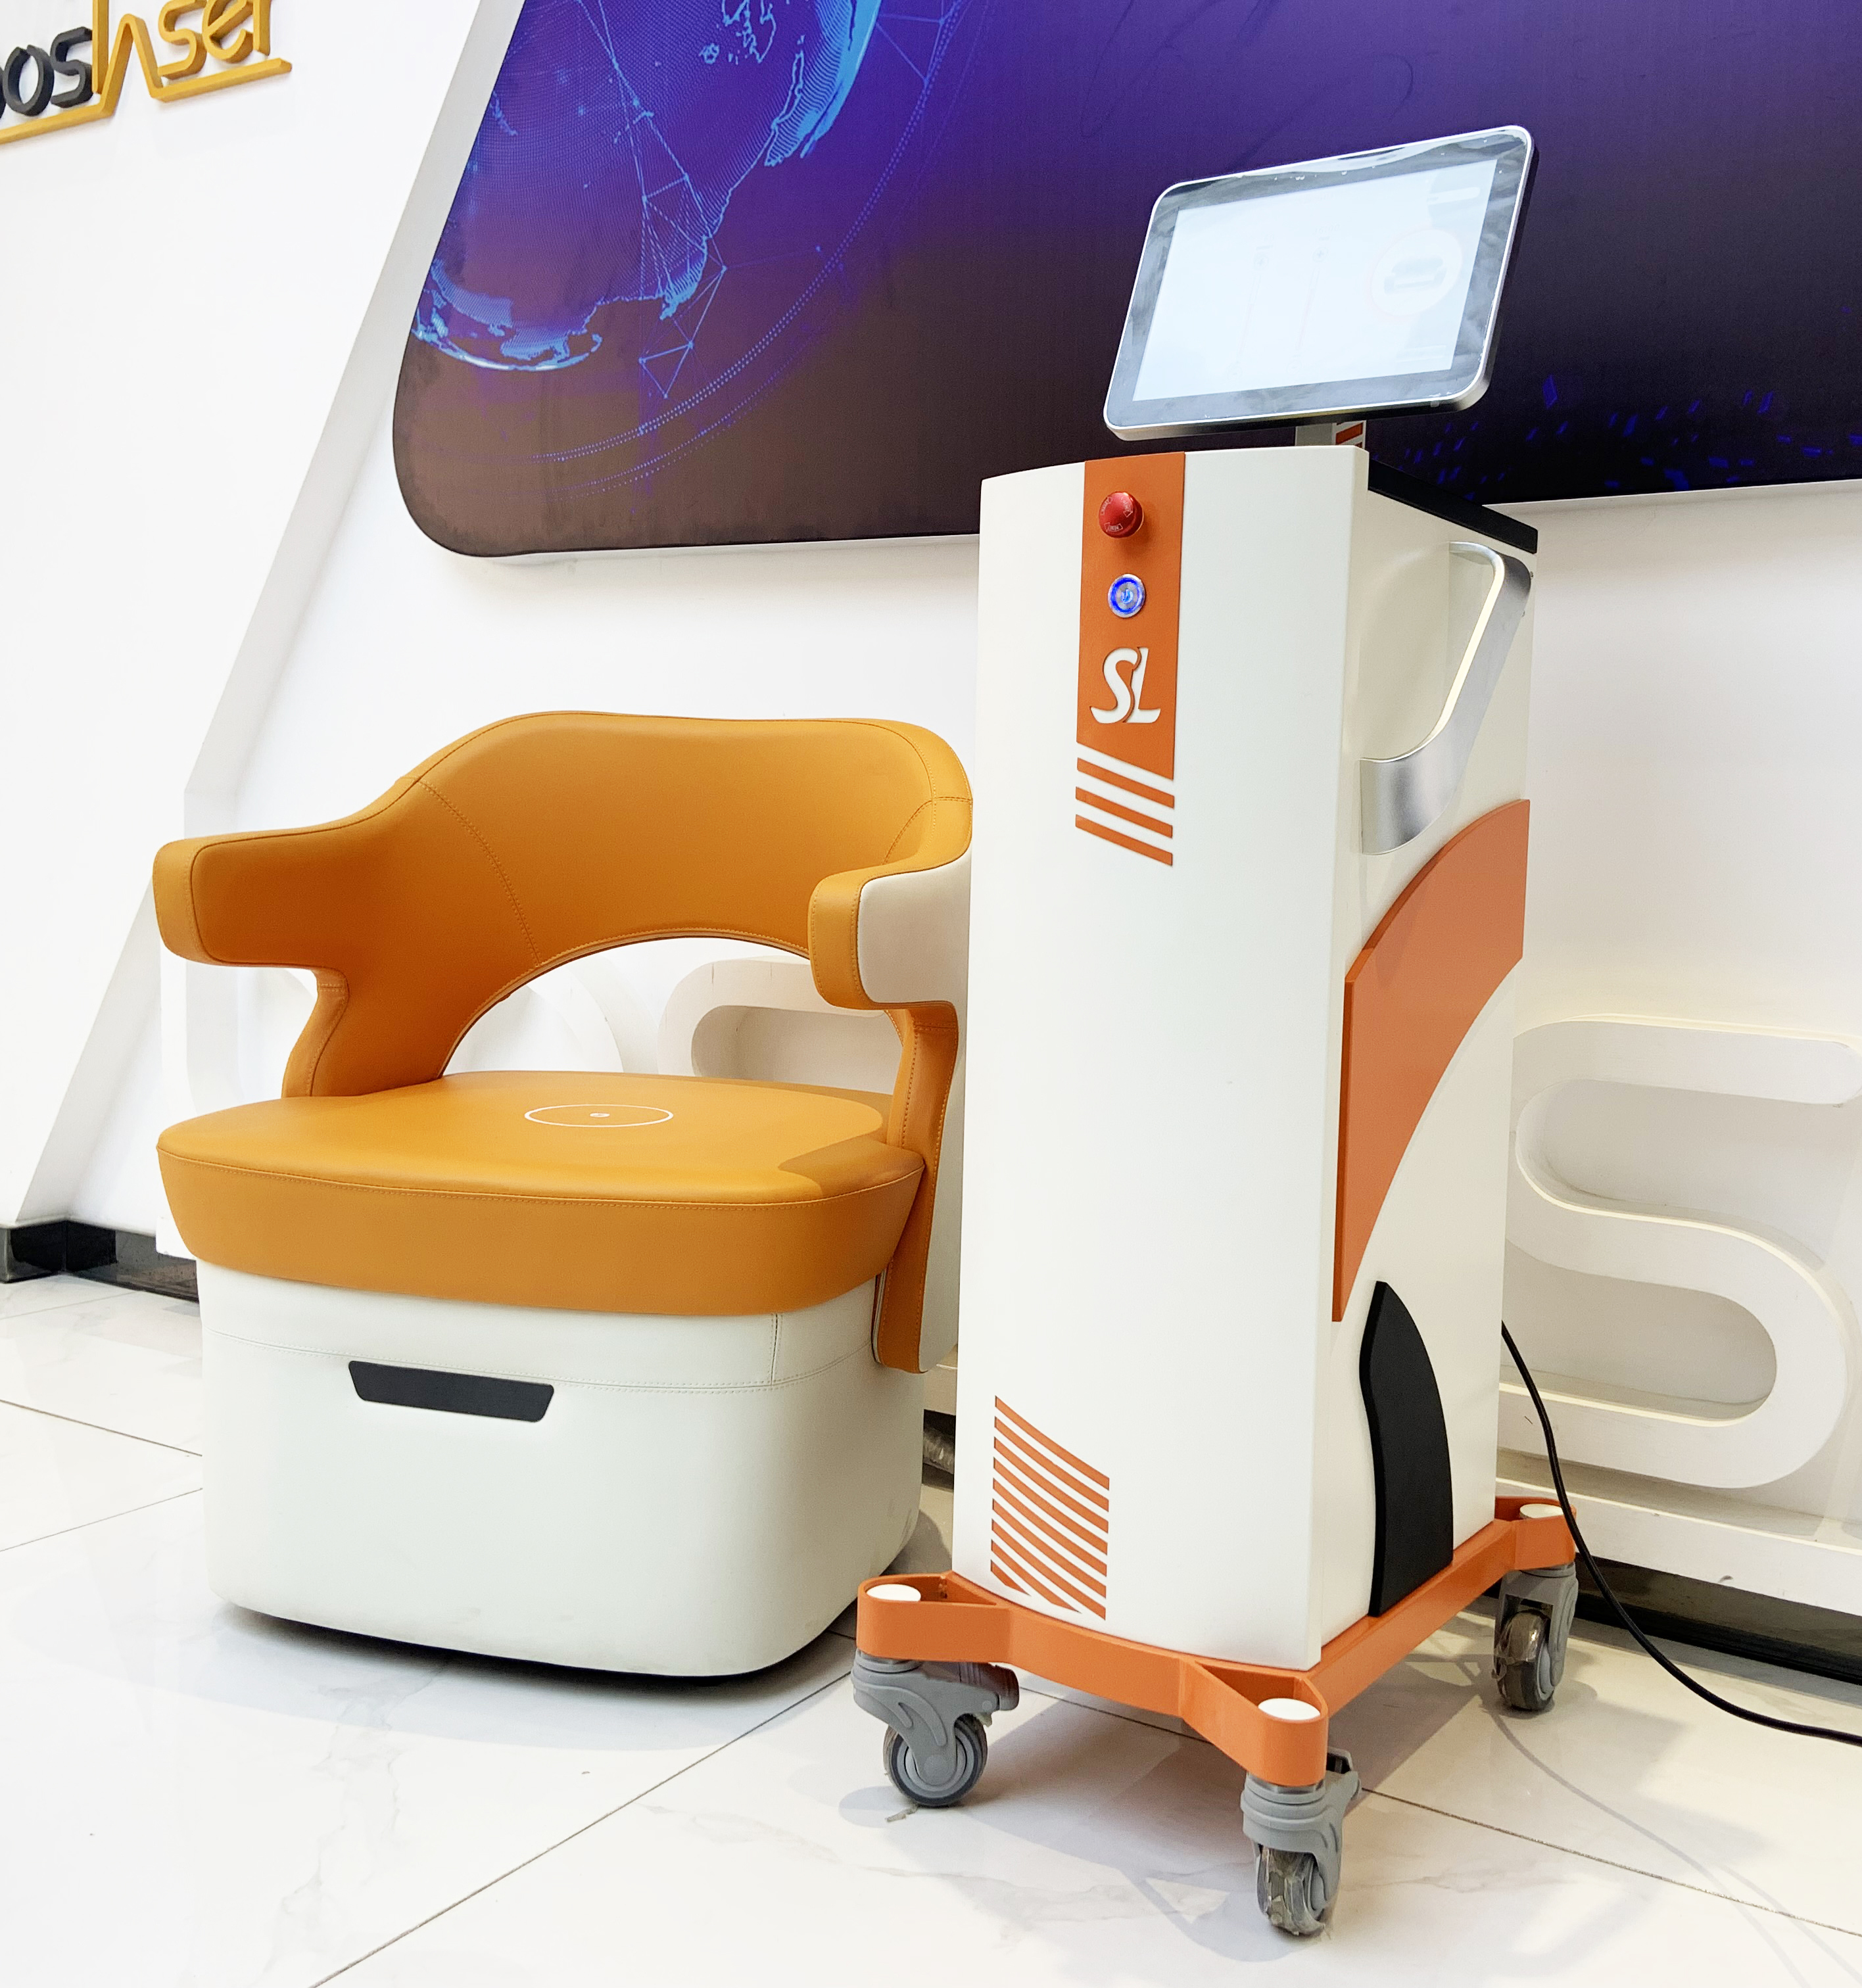 High-intensity focused electromagnetic energy (HIFEM) malalim at matinding pelvic-floor muscle contraction magchair ems sculpting PFM machine